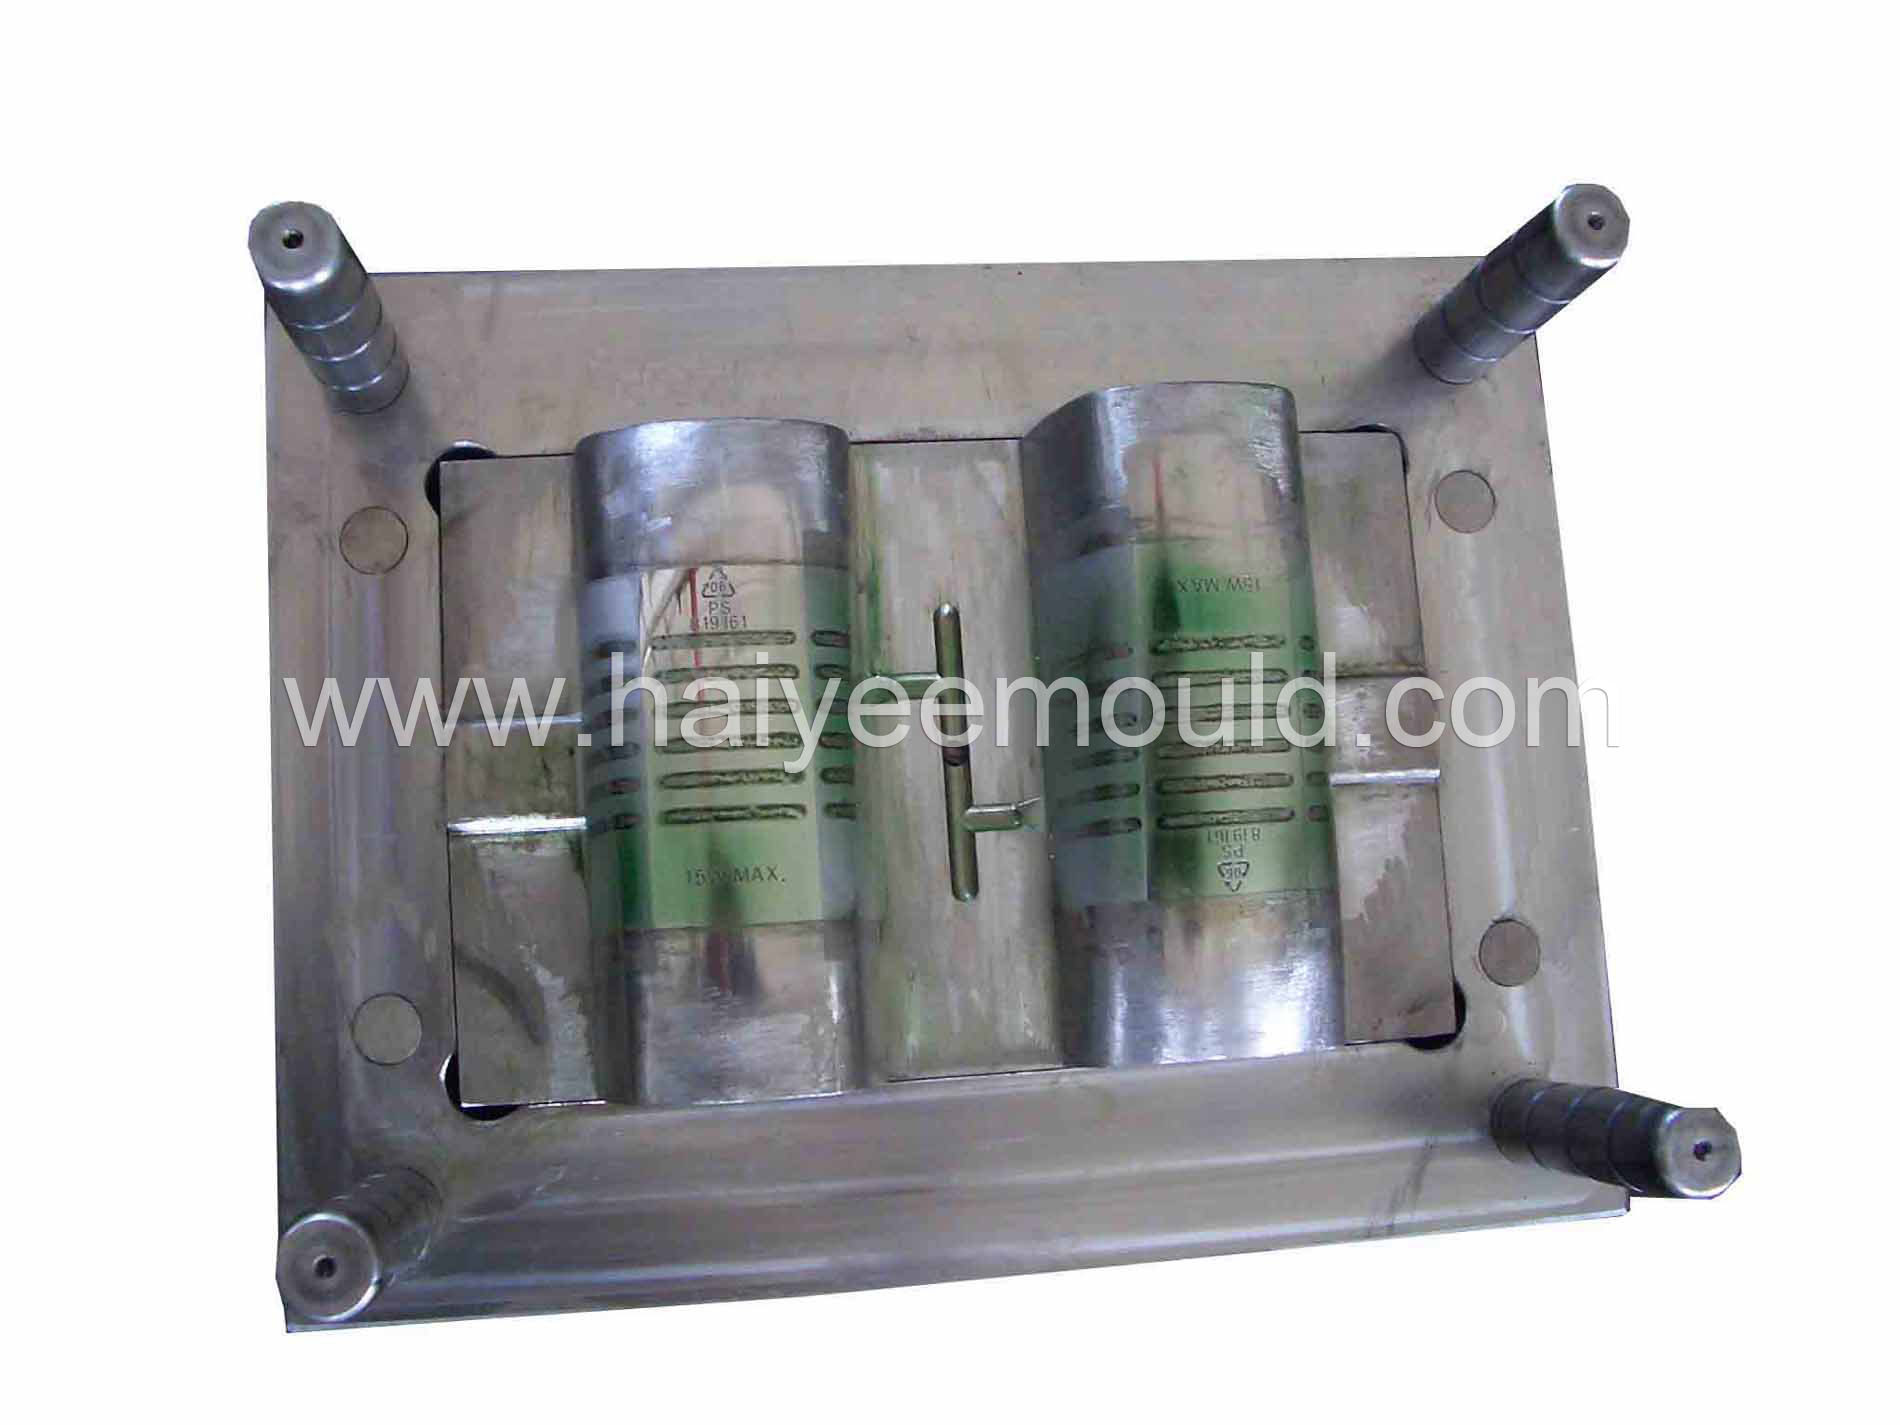 Refrigerator Lamp Cover Mould